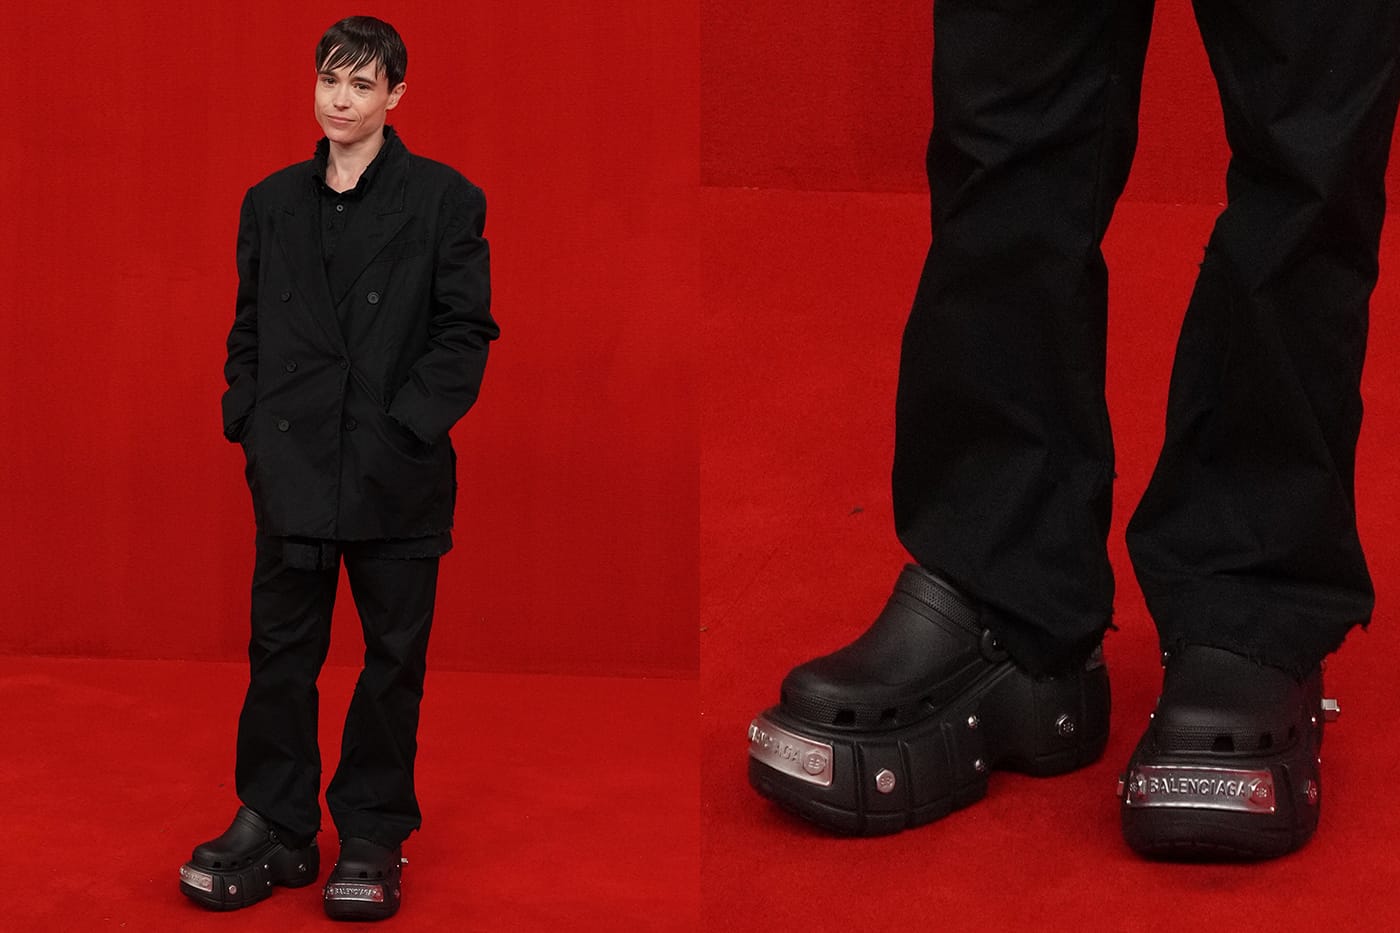 Balenciagas 600 platform Crocs sold out before they were even released